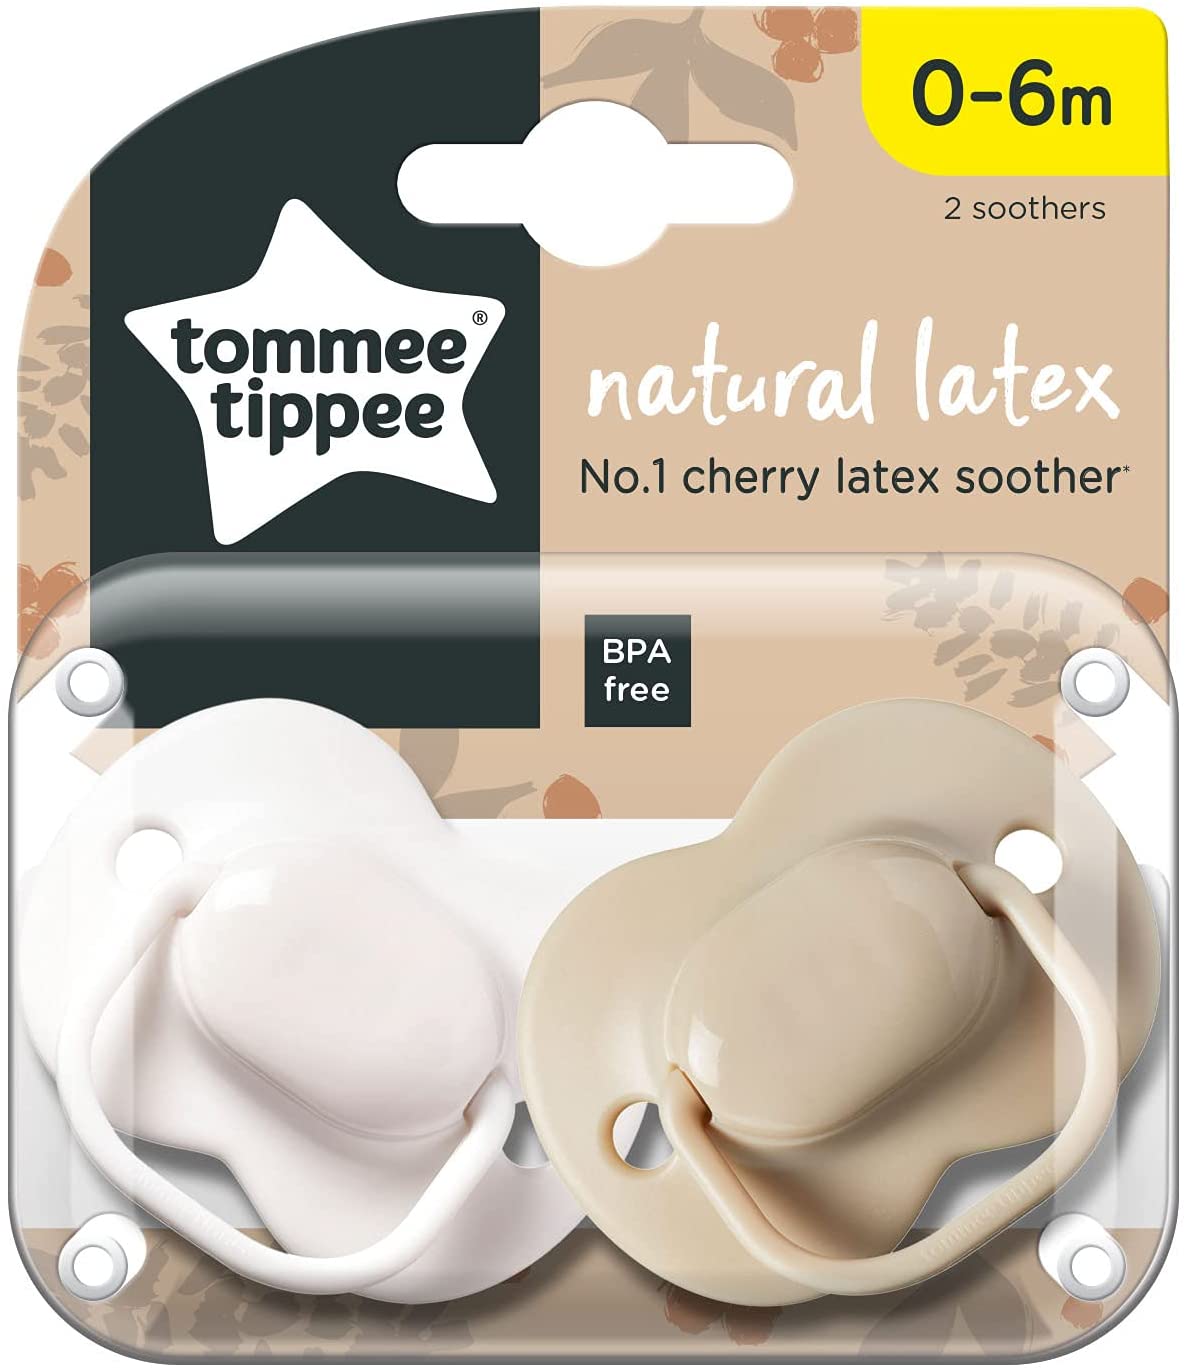 Tommee Tippee Cherry Latex Soother 0-6m